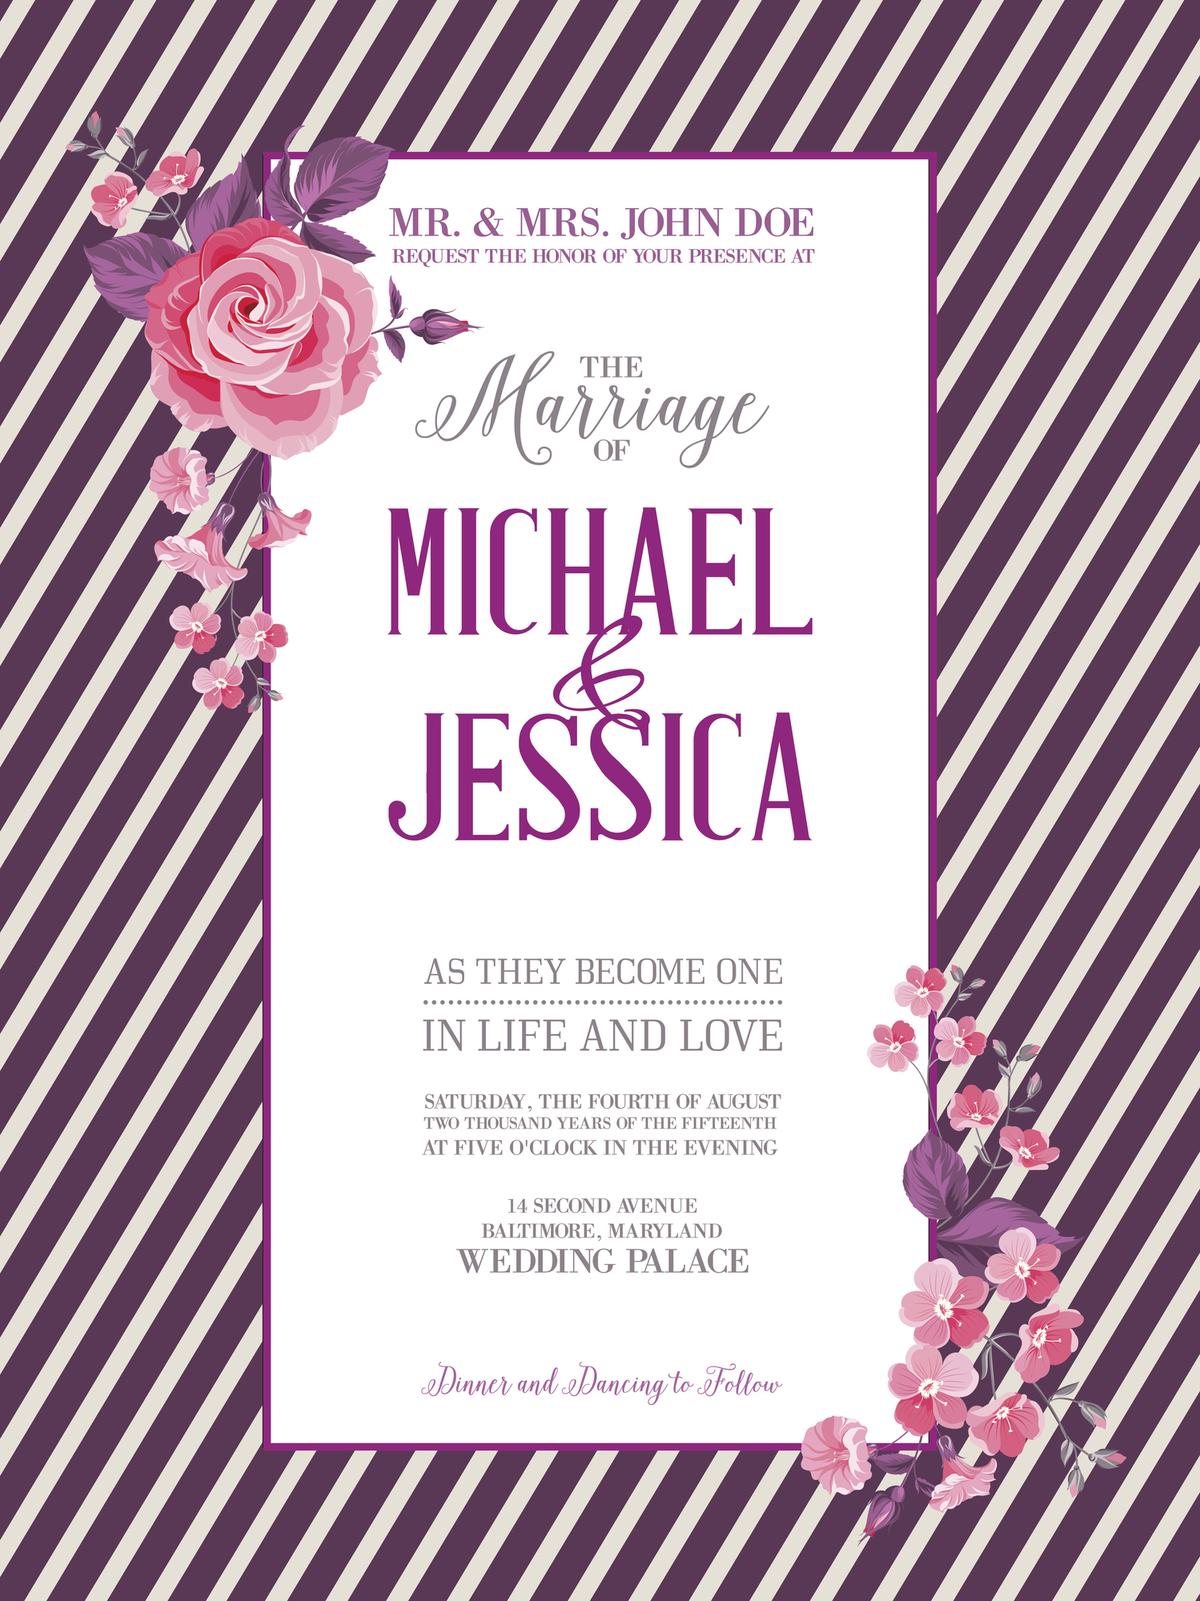 5 Exceptionally Thoughtful Do-it-yourself Wedding Invitations - Wedessence